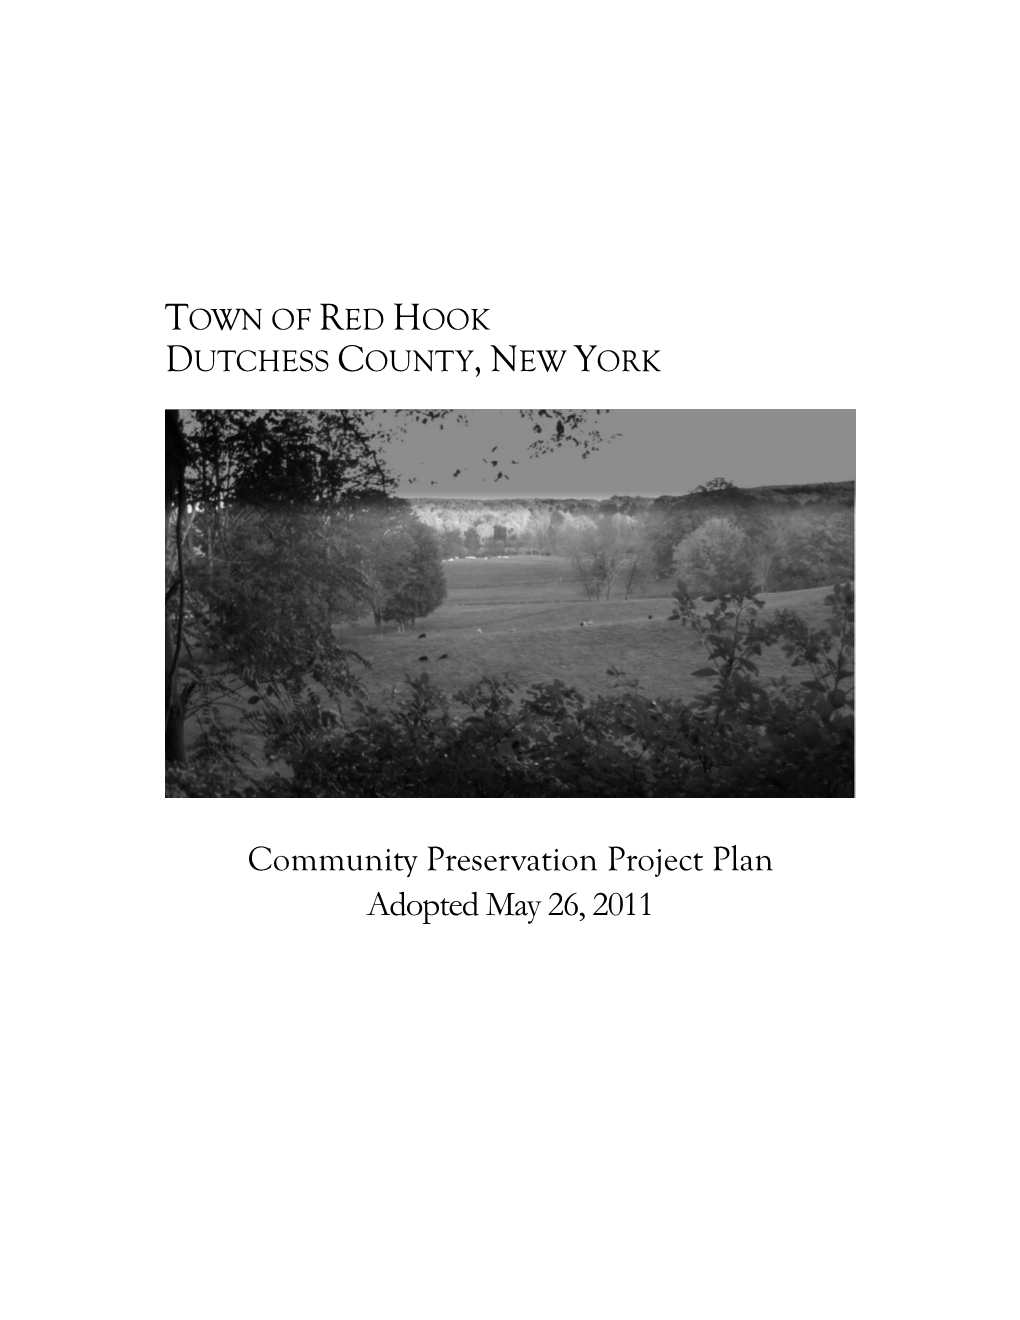 Community Preservation Project Plan Adopted May 26, 2011 TOWN of RED HOOK Adopted Community Preservation Project Plan